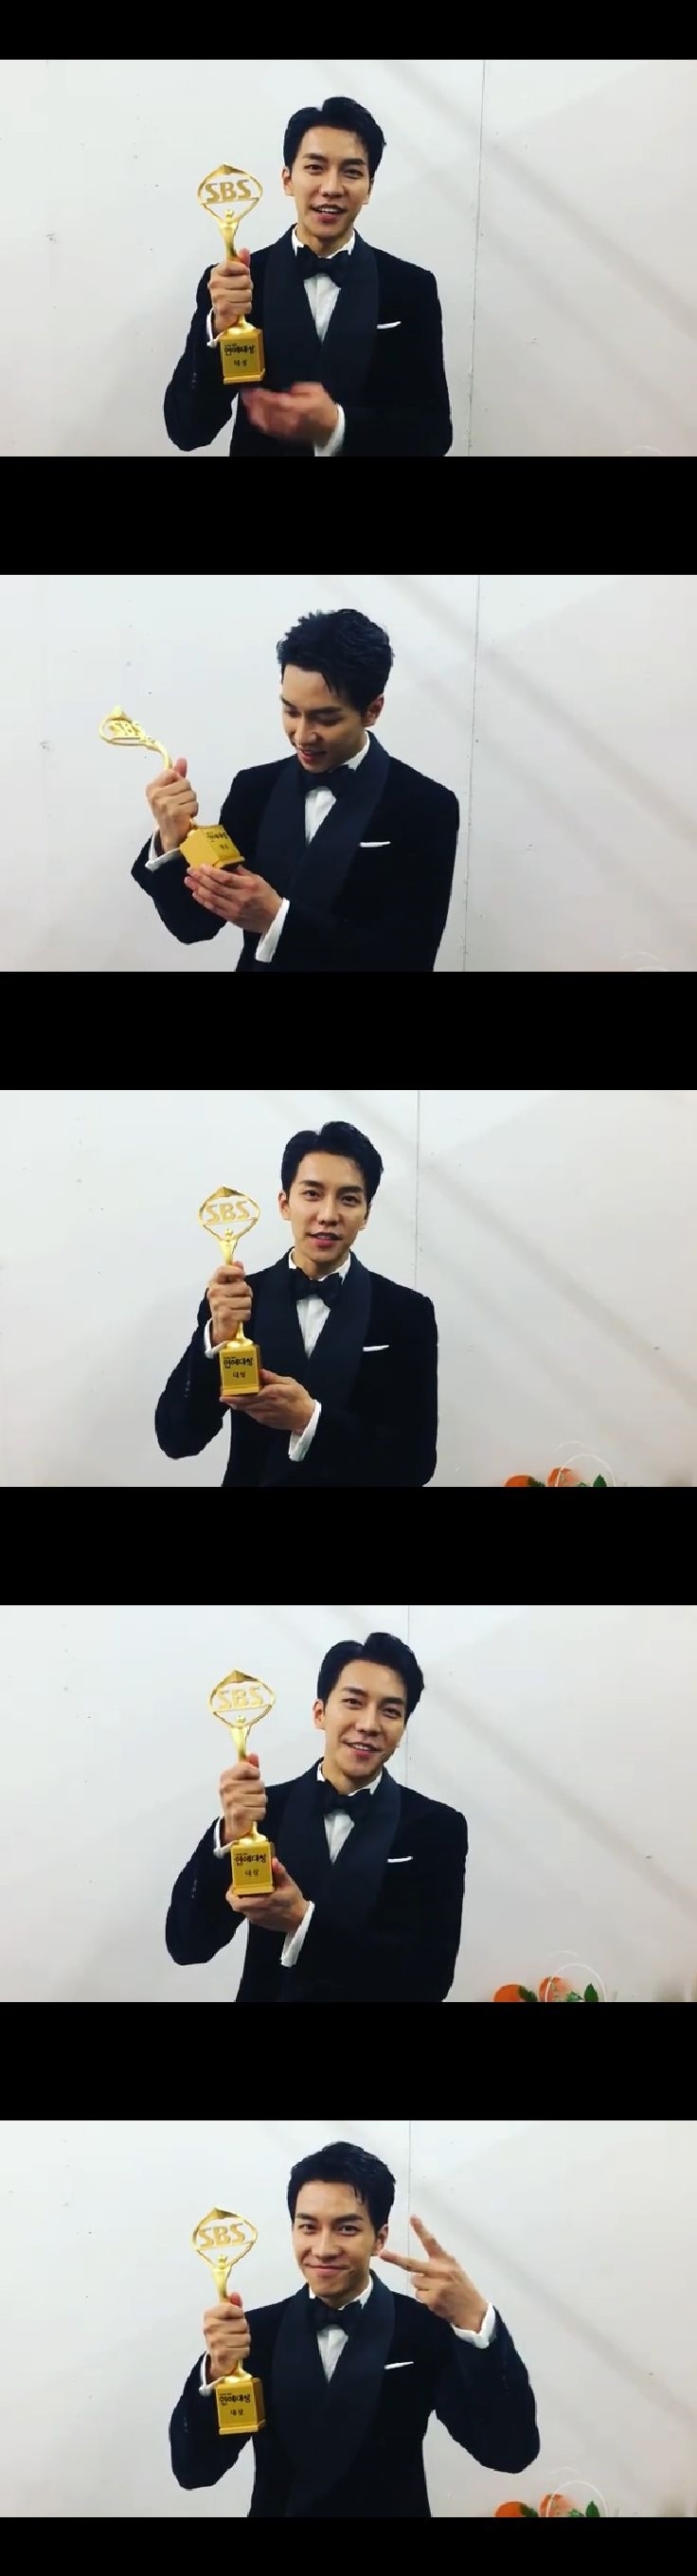 Seoul=) = Singer and actor Lee Seung-gi expressed his impression of winning the 2018 SBS Entertainment Grand Prize.On the 29th, Lee Seung-gis official Instagram said, Thank you for the 2018 SBS Entertainment Grand prize Grand prize! Thank you.A video was posted with the article To the fans who loved all the All The Butlers that gave me an unforgettable moment.Lee Seung-gi said, I did not know that the weight of Grand prize was so big, he said. I am so grateful and if there is anyone I can not talk about at the award speech, do not be sad.Lee Seung-gi said, I remember that the fans have definitely talked about it. I really received this award thanks to you.Thank you for saving and loving All The Butlers. Finally, Lee Seung-gi said, I hope you will send a lot of energy and affection to make All The Butlers rise even more in 2019. Thank you.Thank you again, he said, thanking me again and finishing his testimony.Meanwhile, Lee Seung-gi became the main character of Grand Prize in All The Butlers at 2018 SBS Entertainment Grand Prize held at Sangam SBS Prism Tower in Seoul Mapo-gu on the 28th.